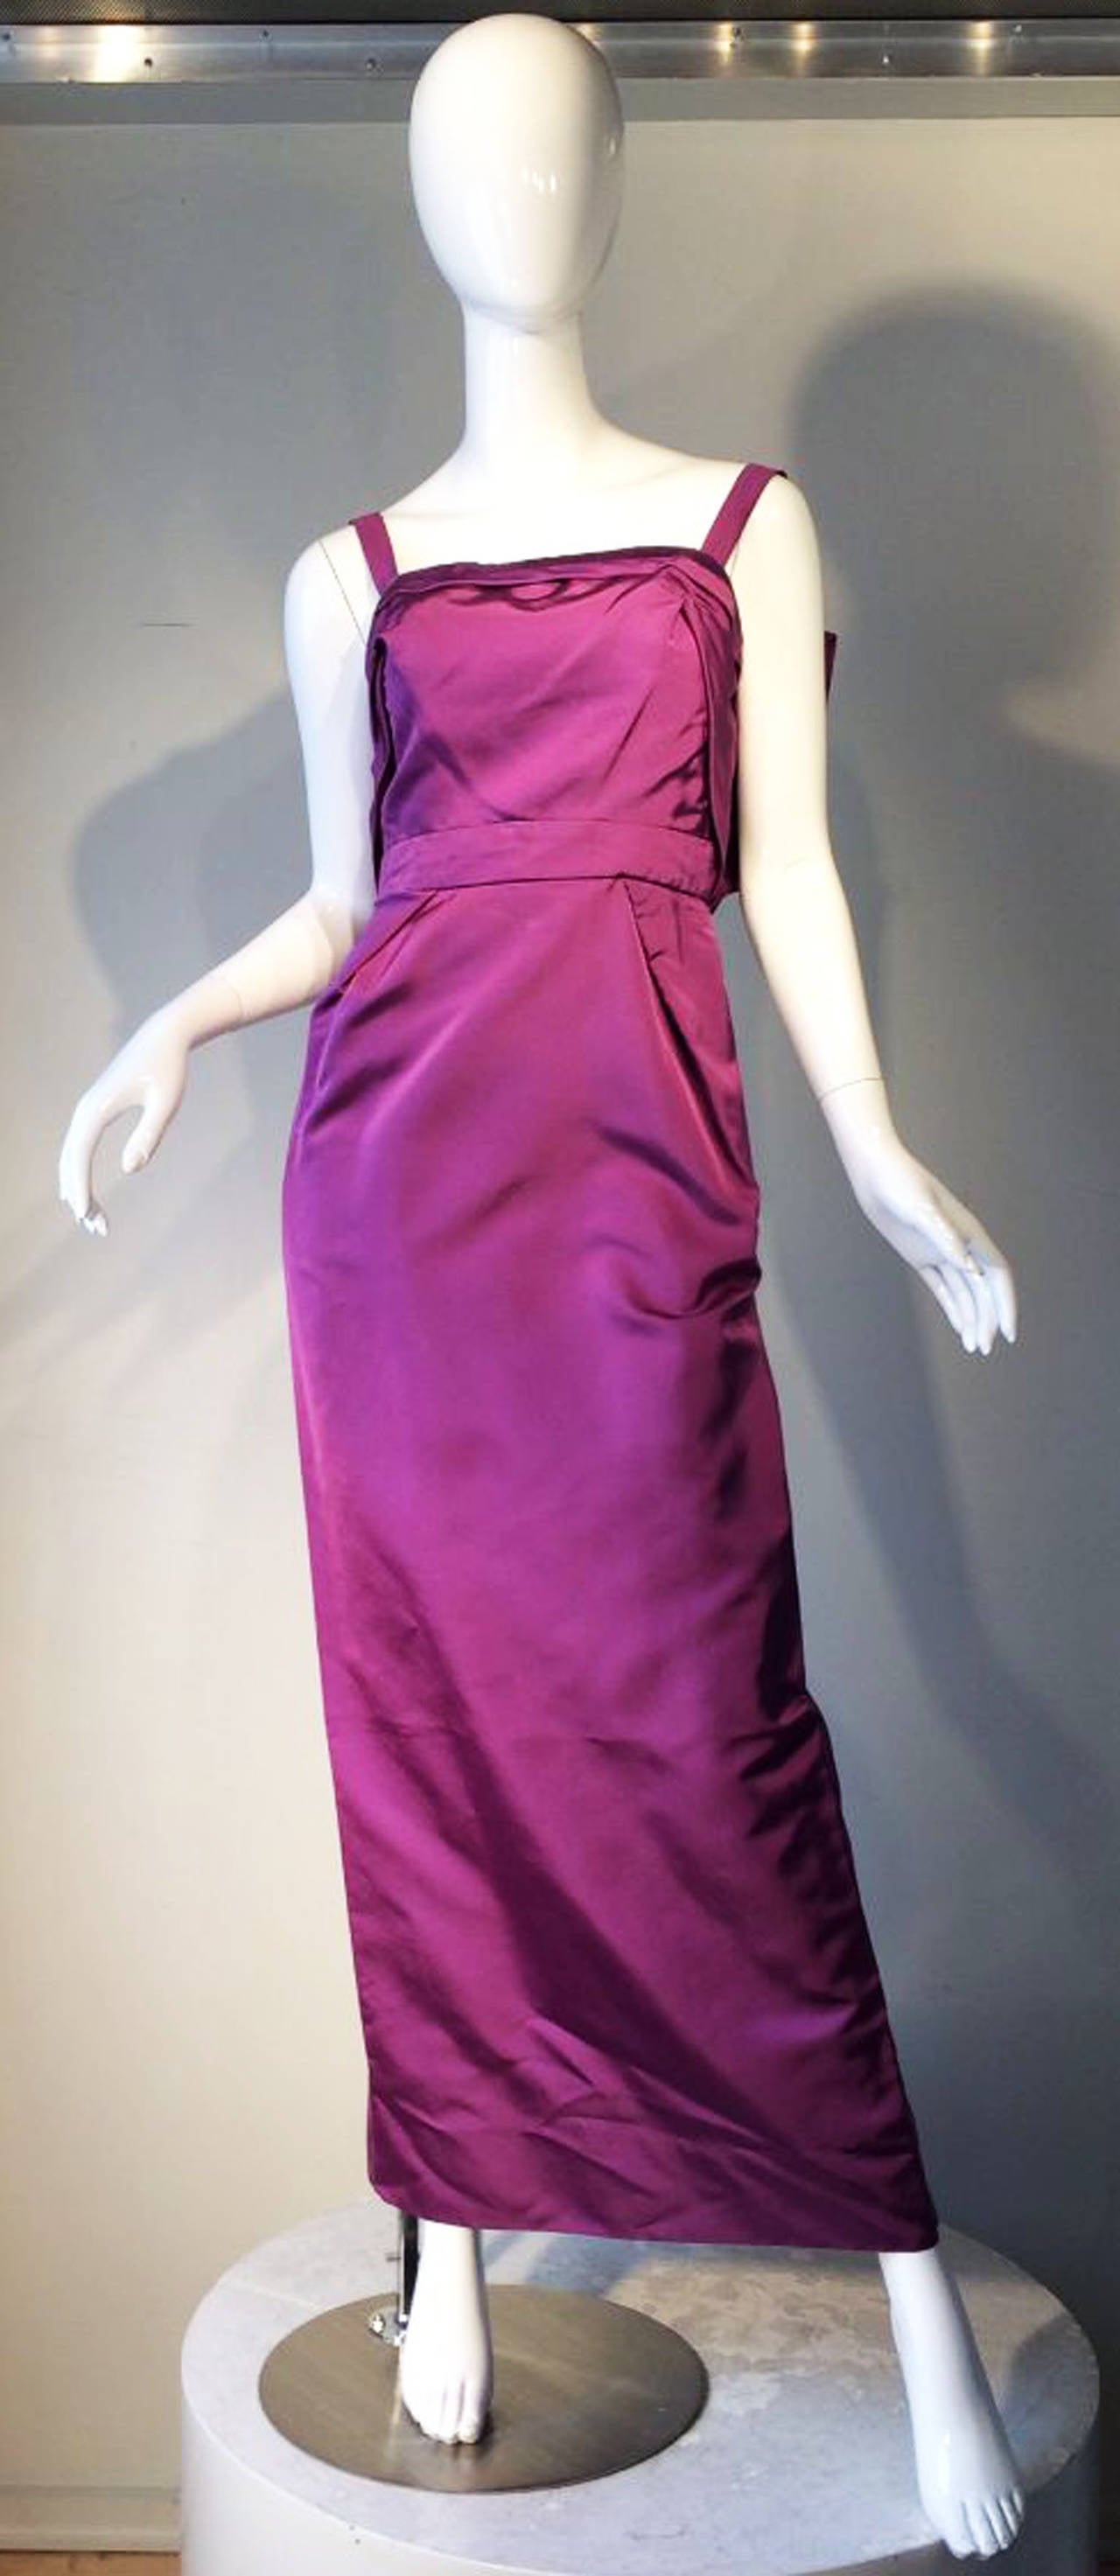 A fine and rare vintage Travilla evening gown after the iconic gown worn by Marilyn Monroe for the film, Gentlemen Prefer Blondes (1953). Sculpted vibrant 